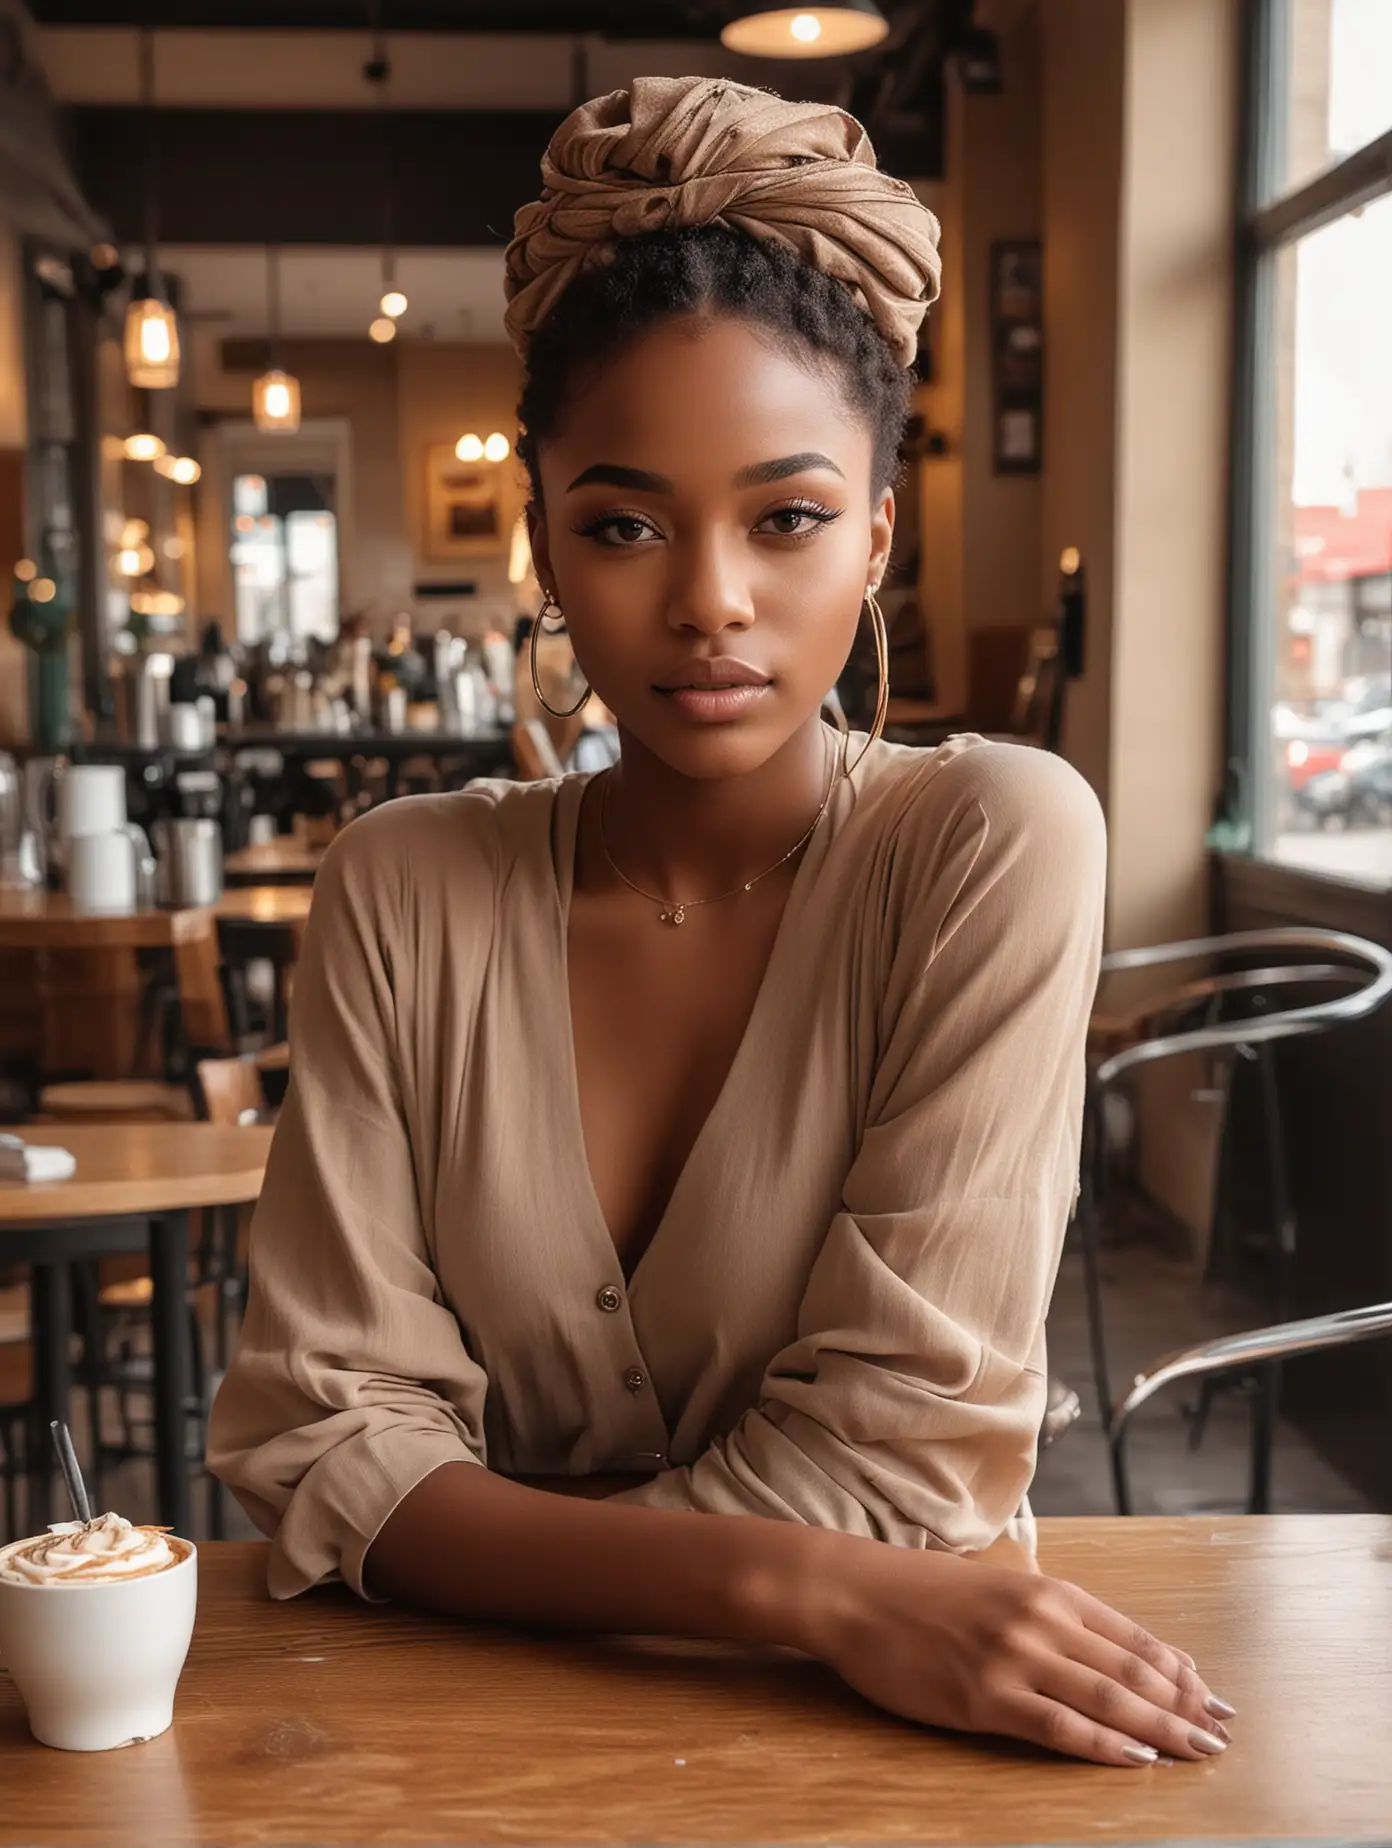 African-American，girl, Young, sexy, fashionable clothing and exquisite makeup, in a cafe, exquisite facial features, facing the camera, professional photography technique, full body shot